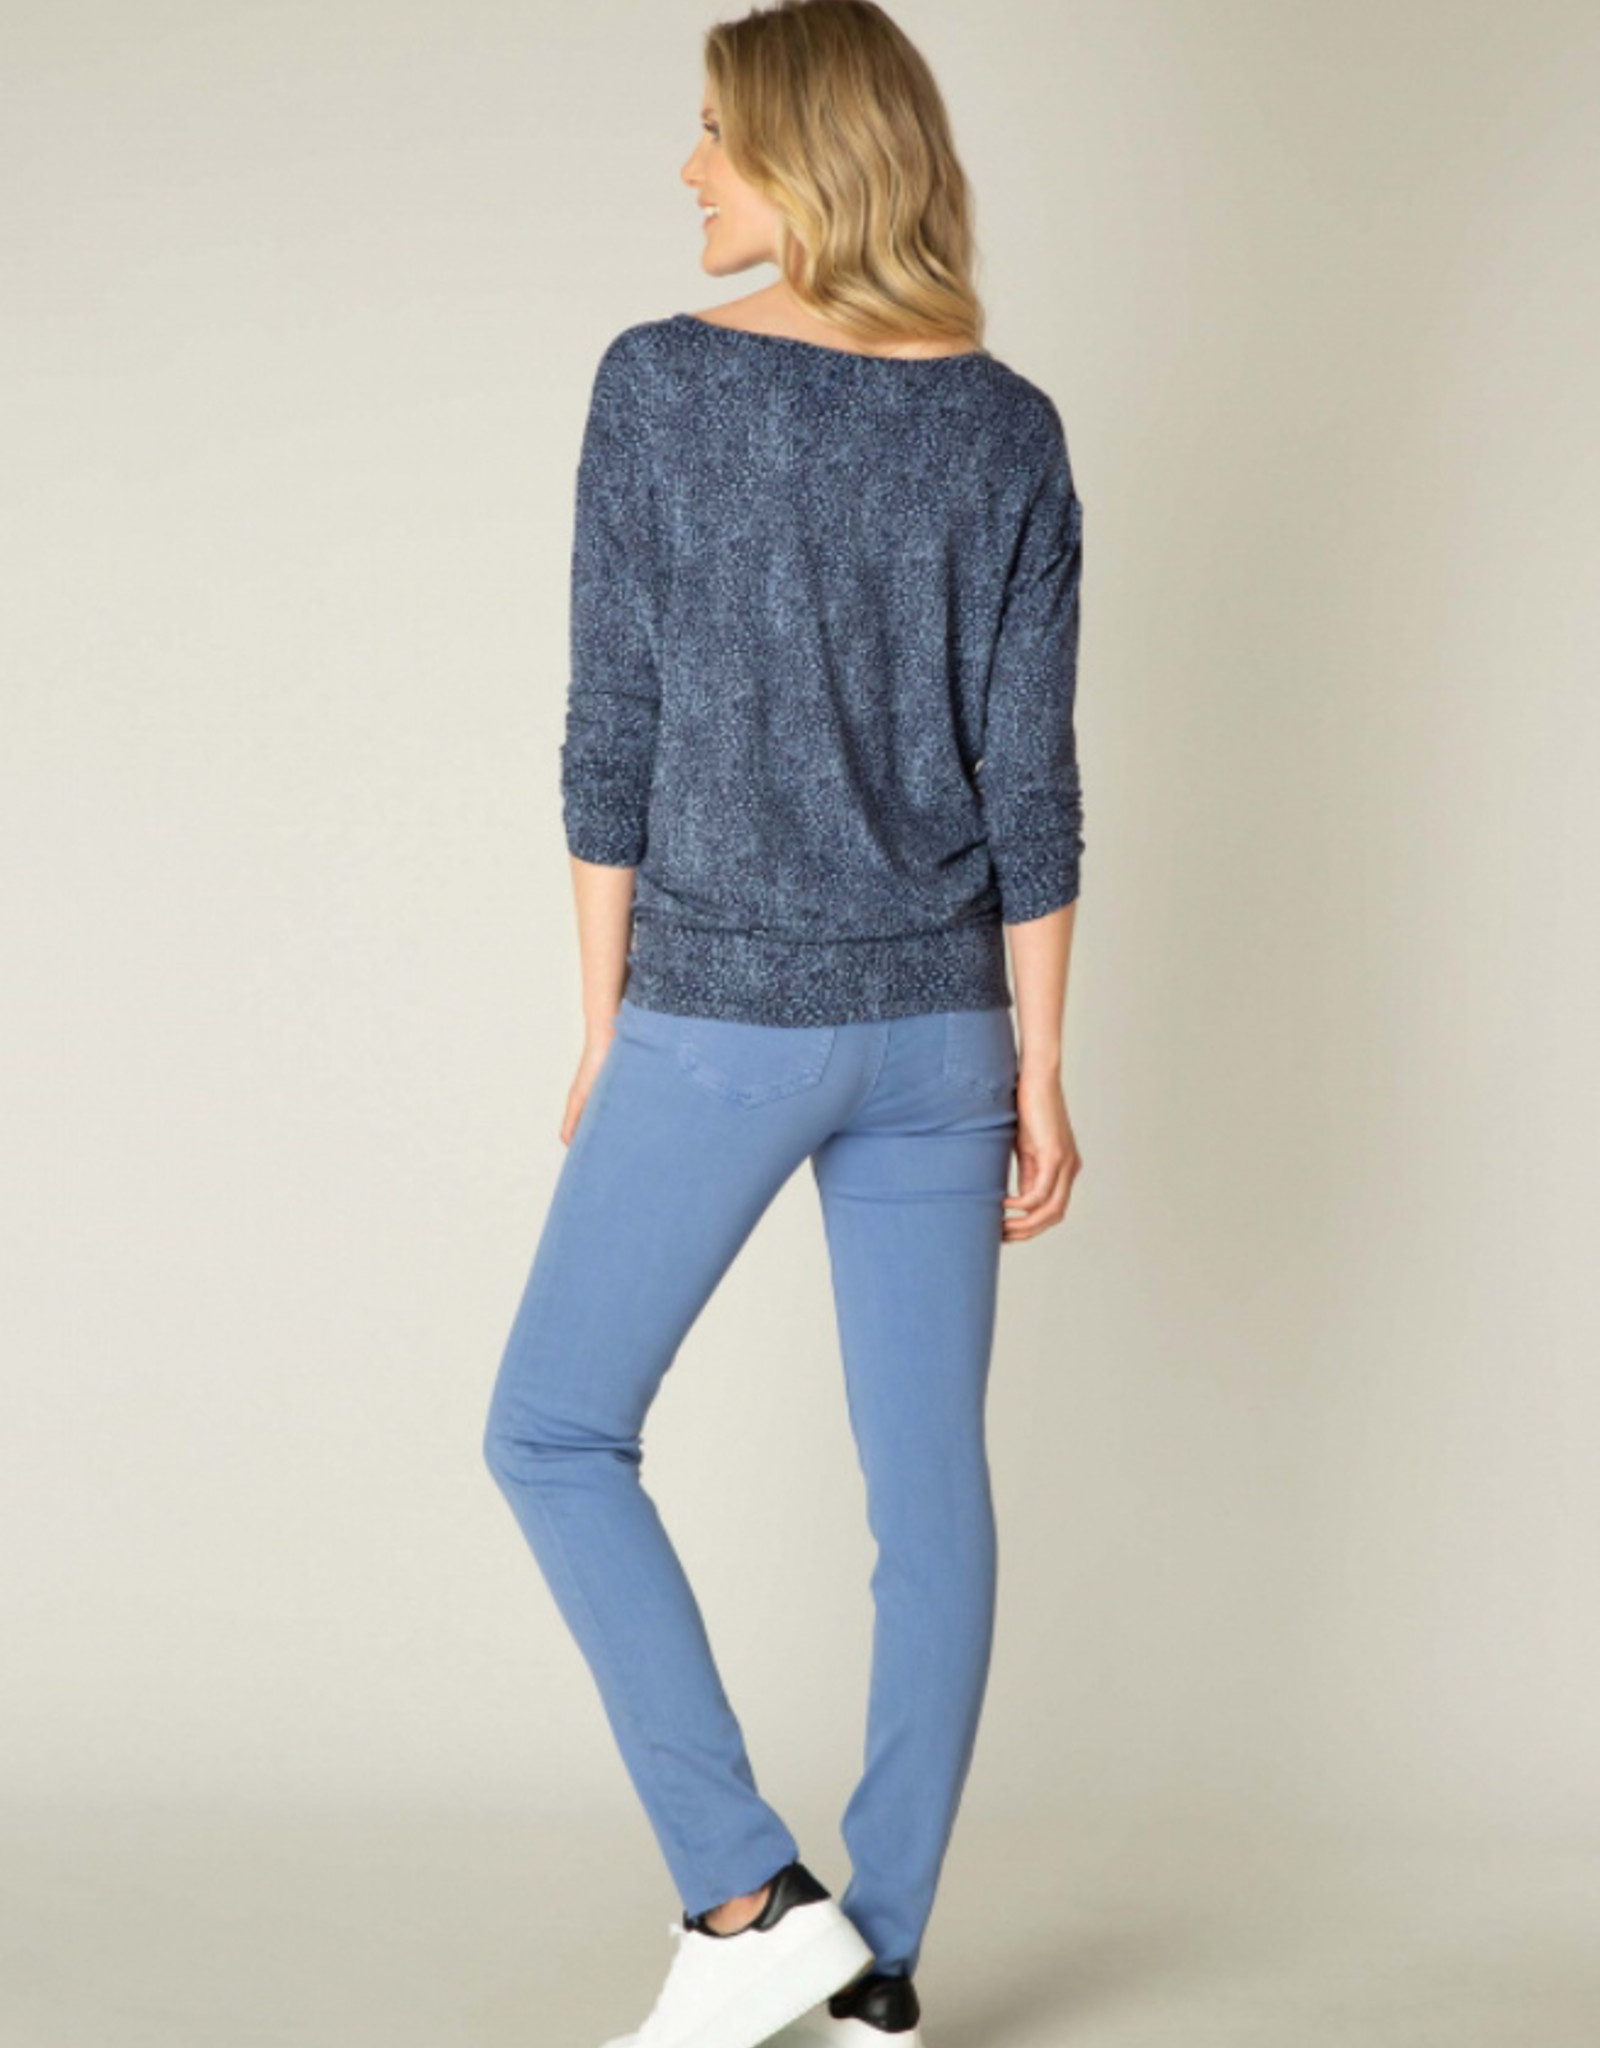 Yest The Go-To Top Long Sleeve 88985B